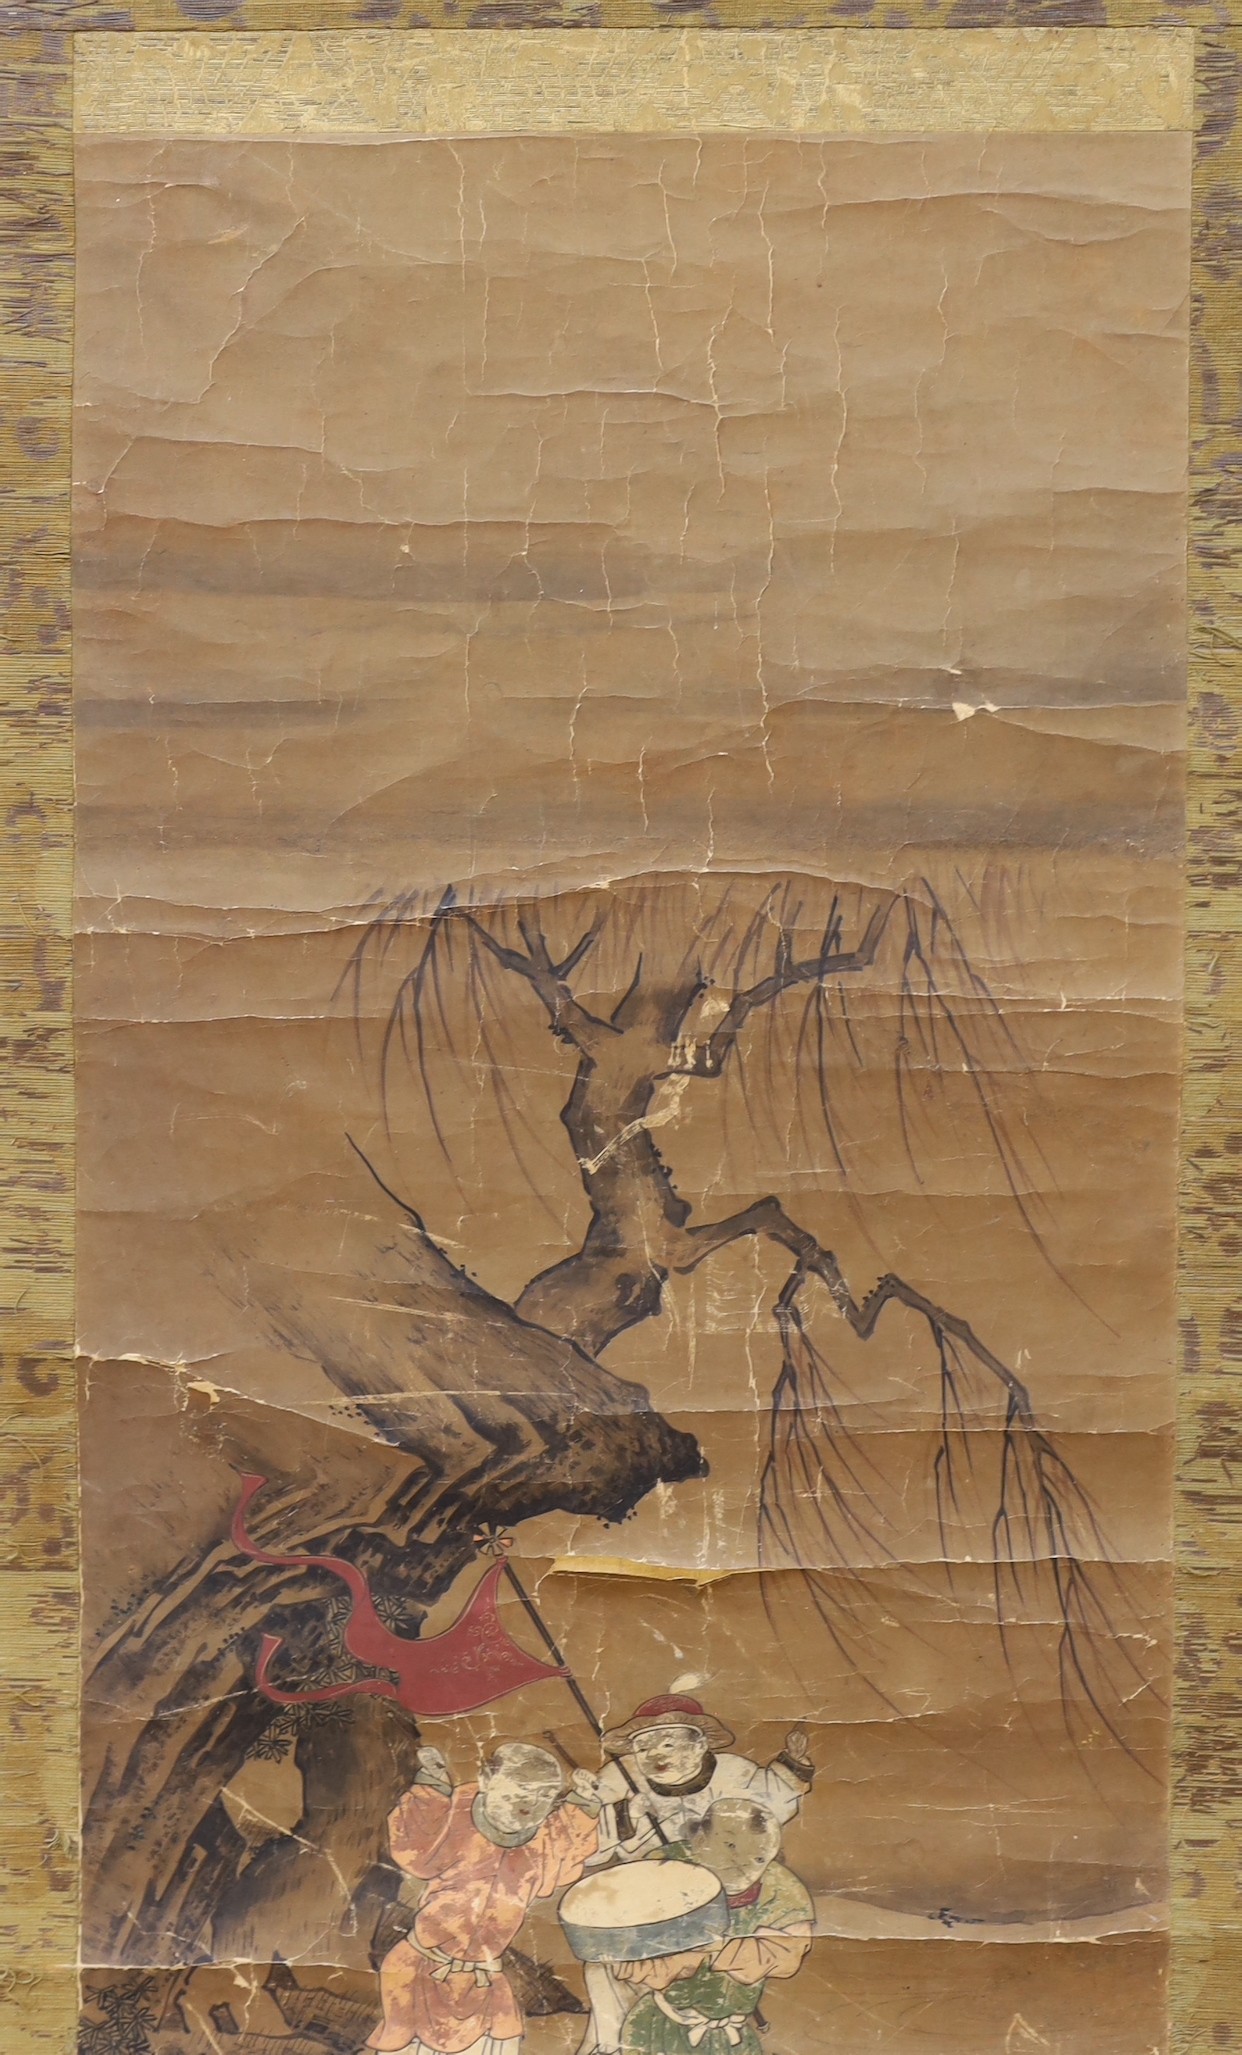 A 19th century Chinese scroll painting on paper of boys in a landscape, Image 69 cm X 31.5 cm